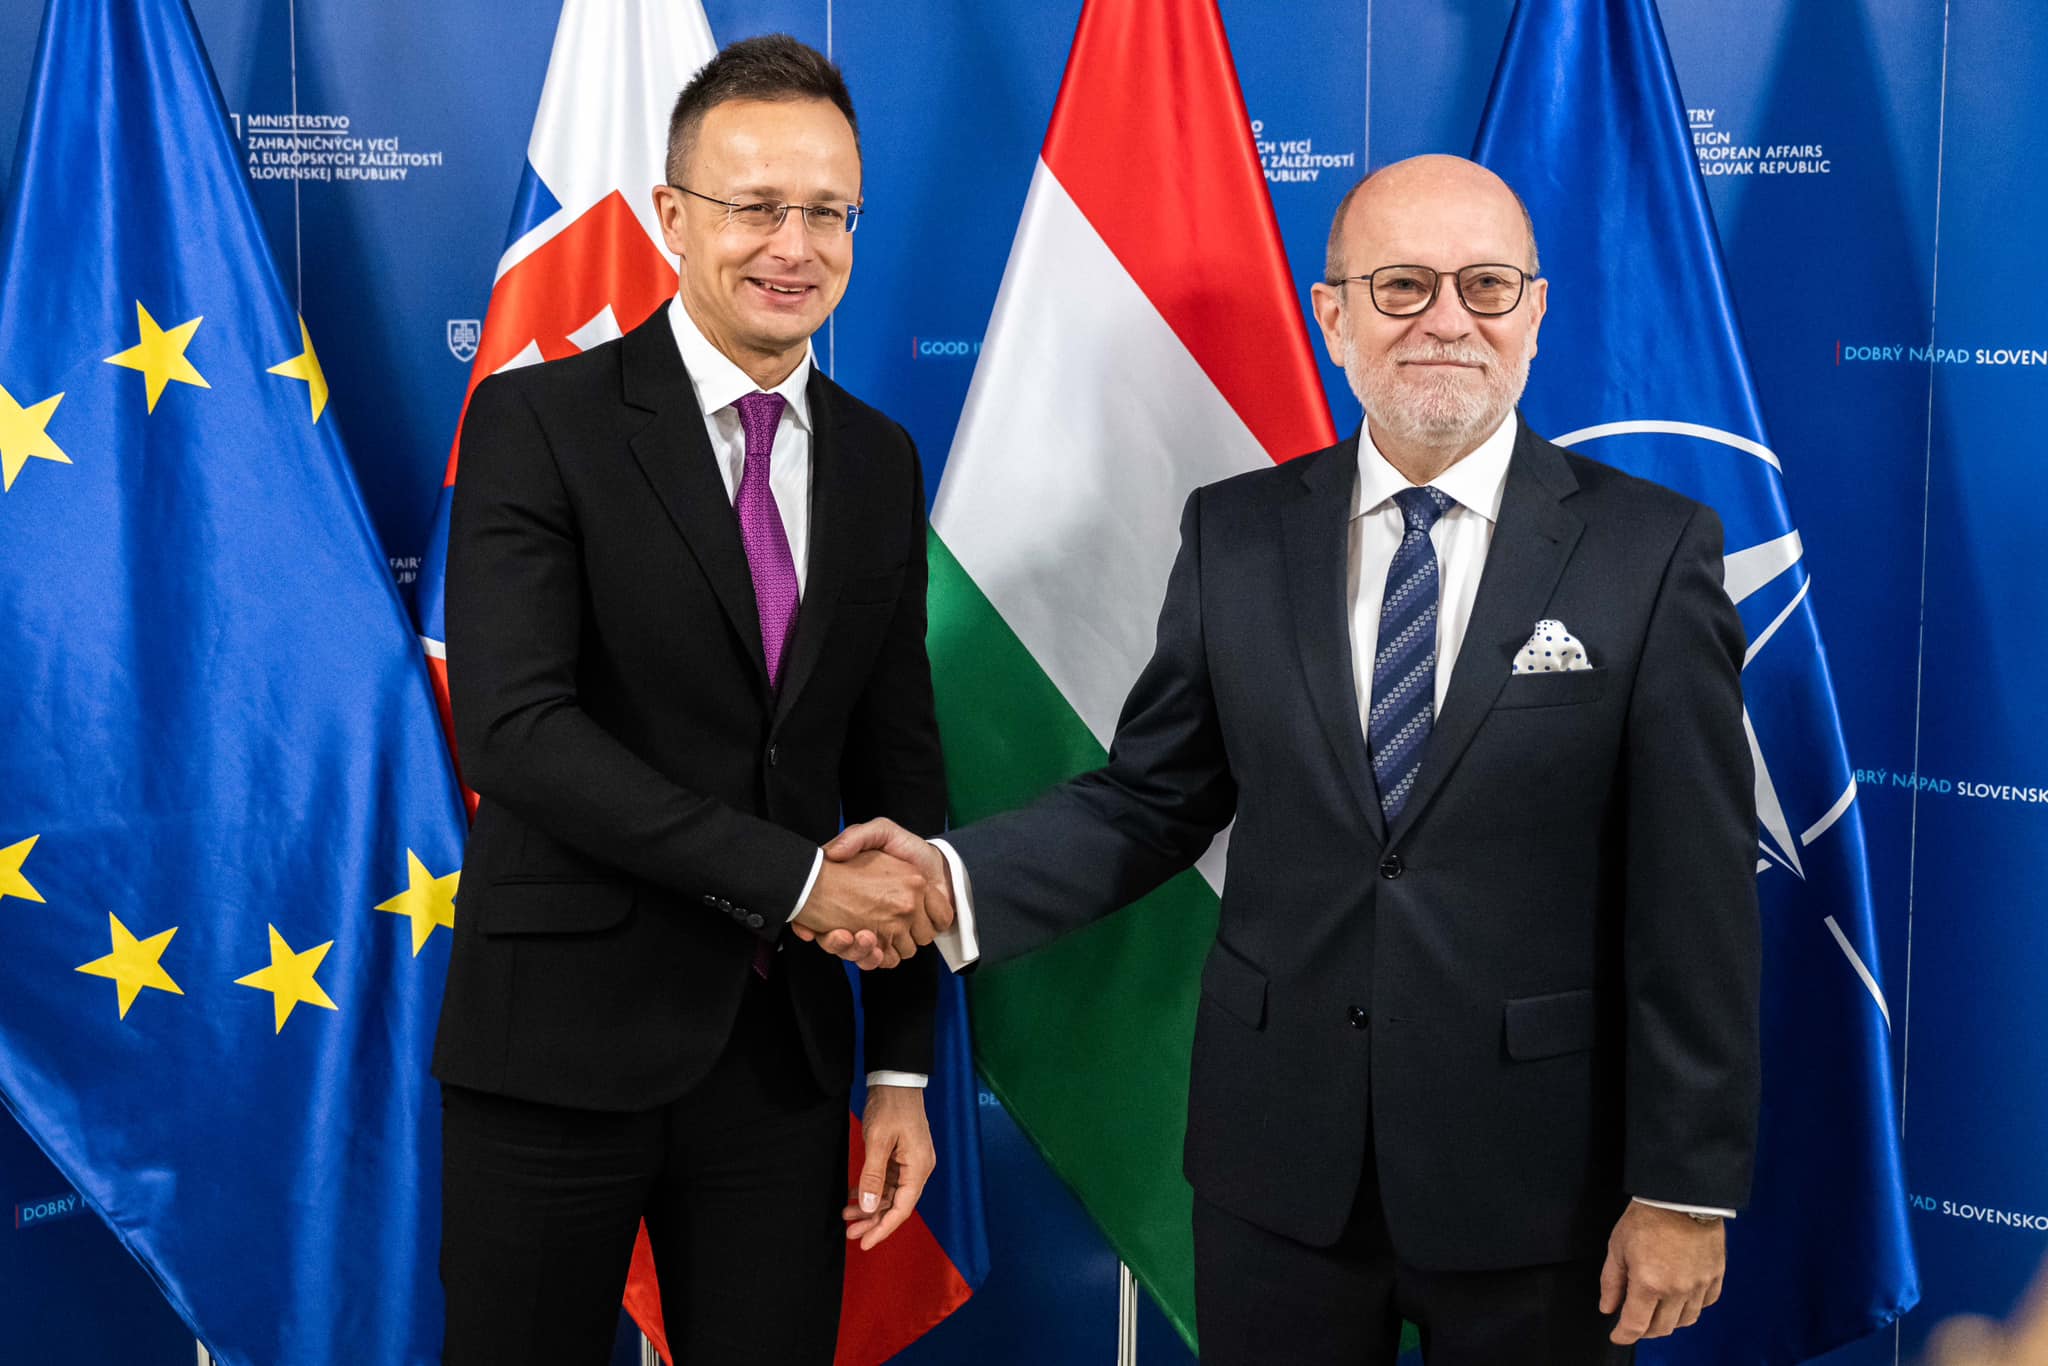 Hungary and Slovakia Both Profiting from Cooperation